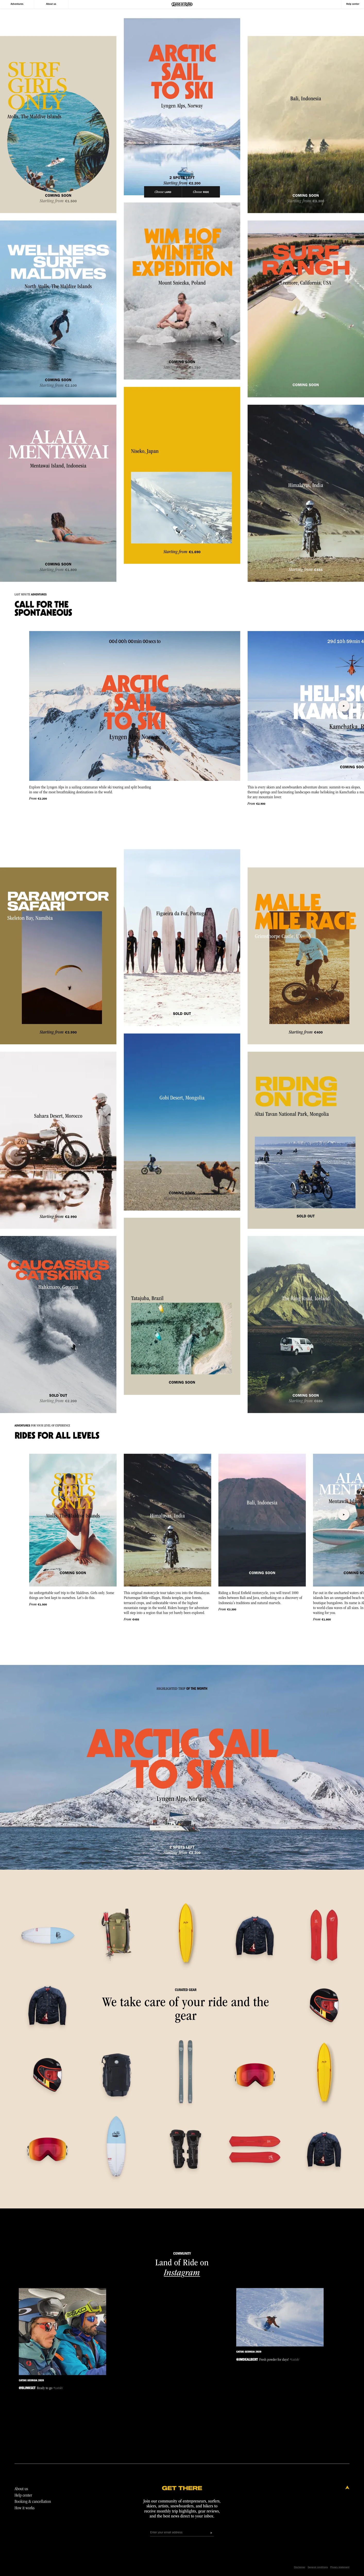 Land of Ride Landing Page Example: We open up a world of adventures for surf, ski, snowboard and motorbike aficionados to practice their favorite sport and meet like-minded people.